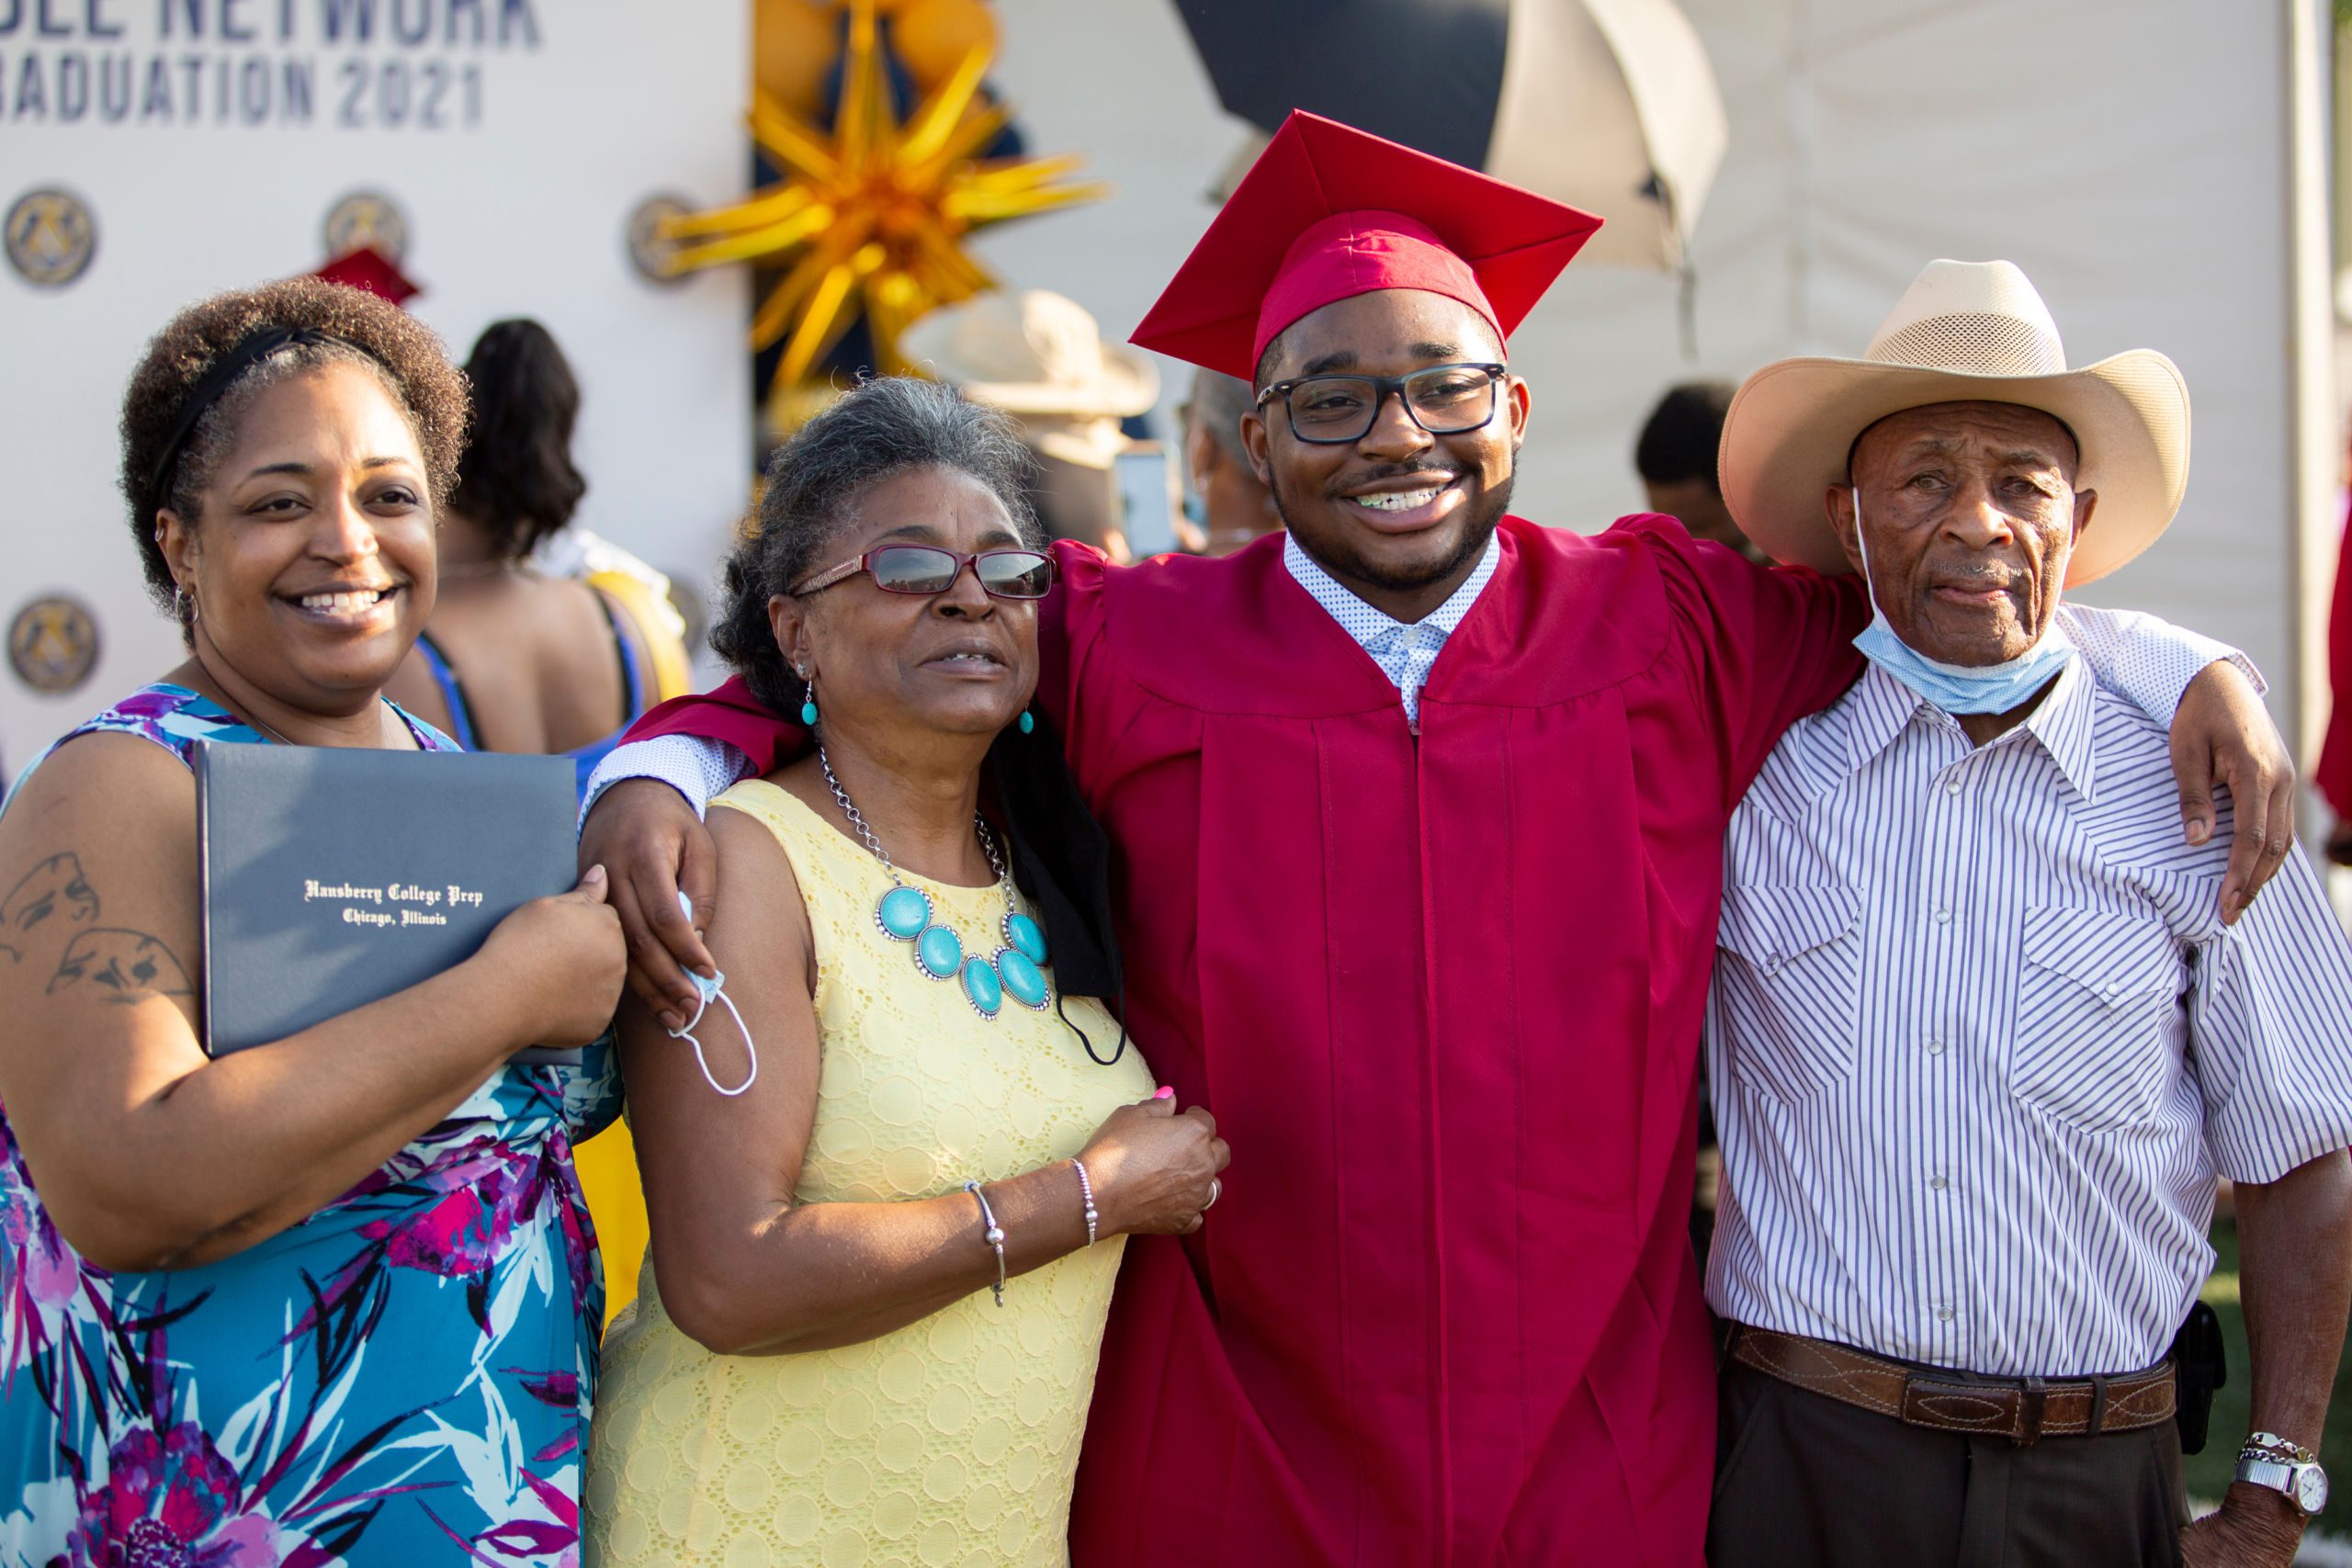 Photo shows a graduate from Hansberry College Prep in 2021, smiling with his family at graduation